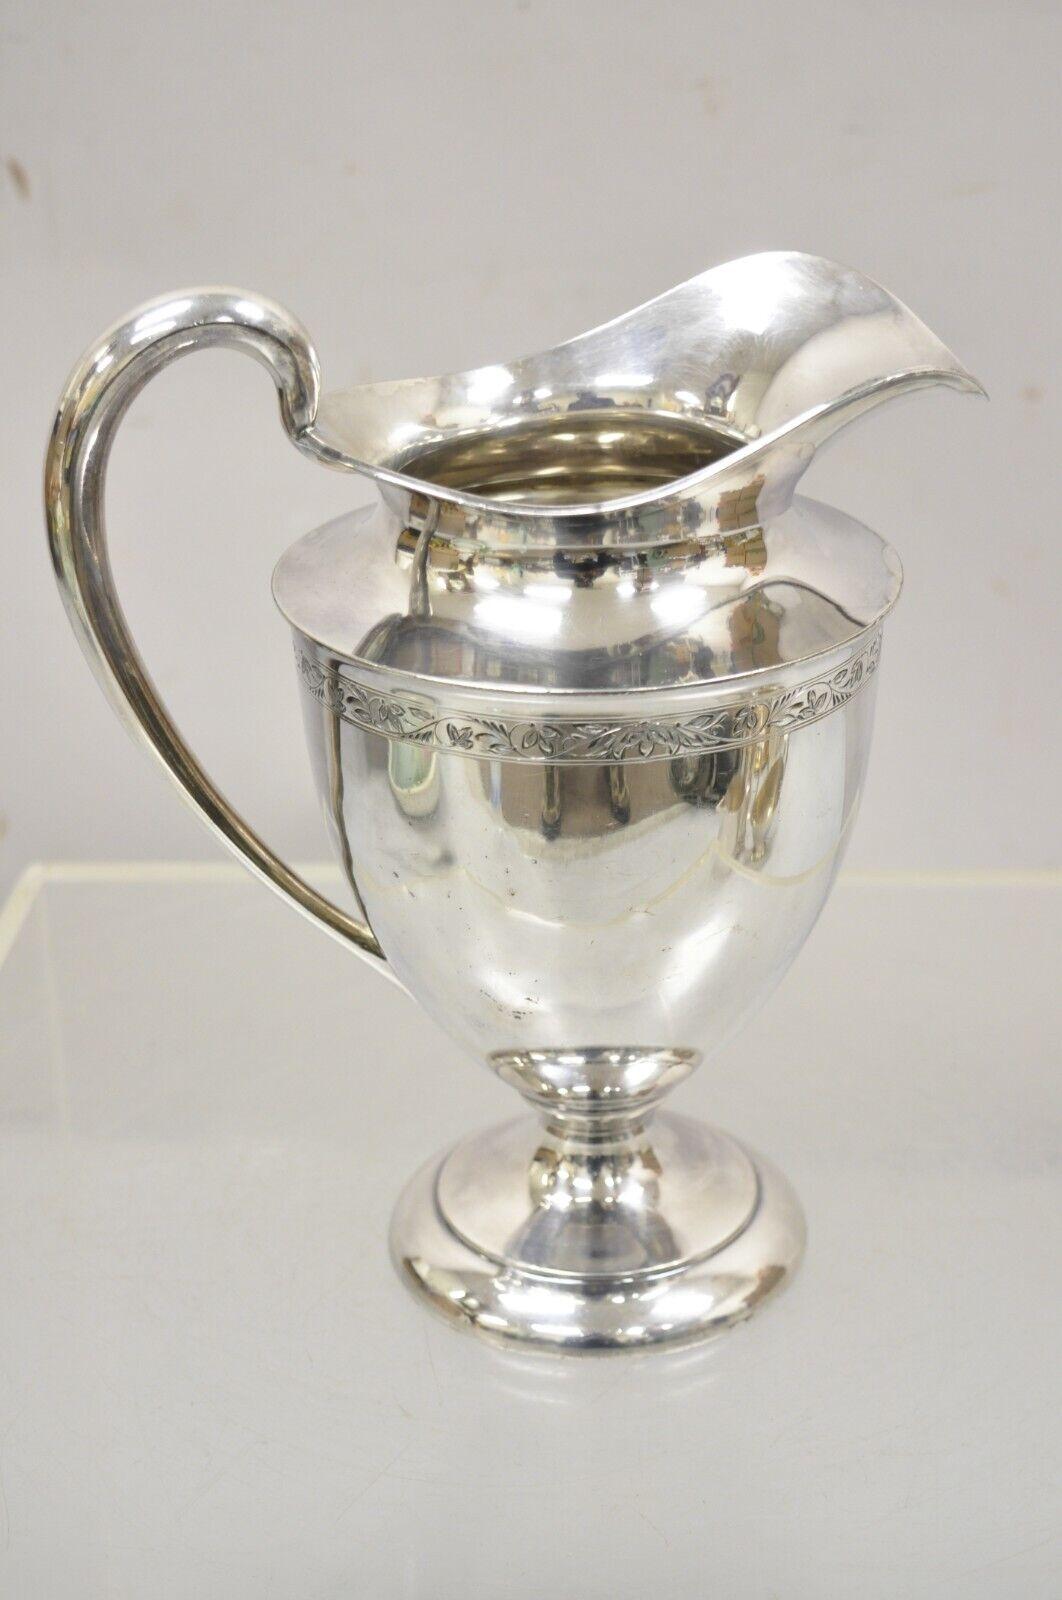 Antique Wilcox S.P. Co International 7016 Silver Plated Water Pitcher. Circa Early 20th Century. Measurements: 10.5